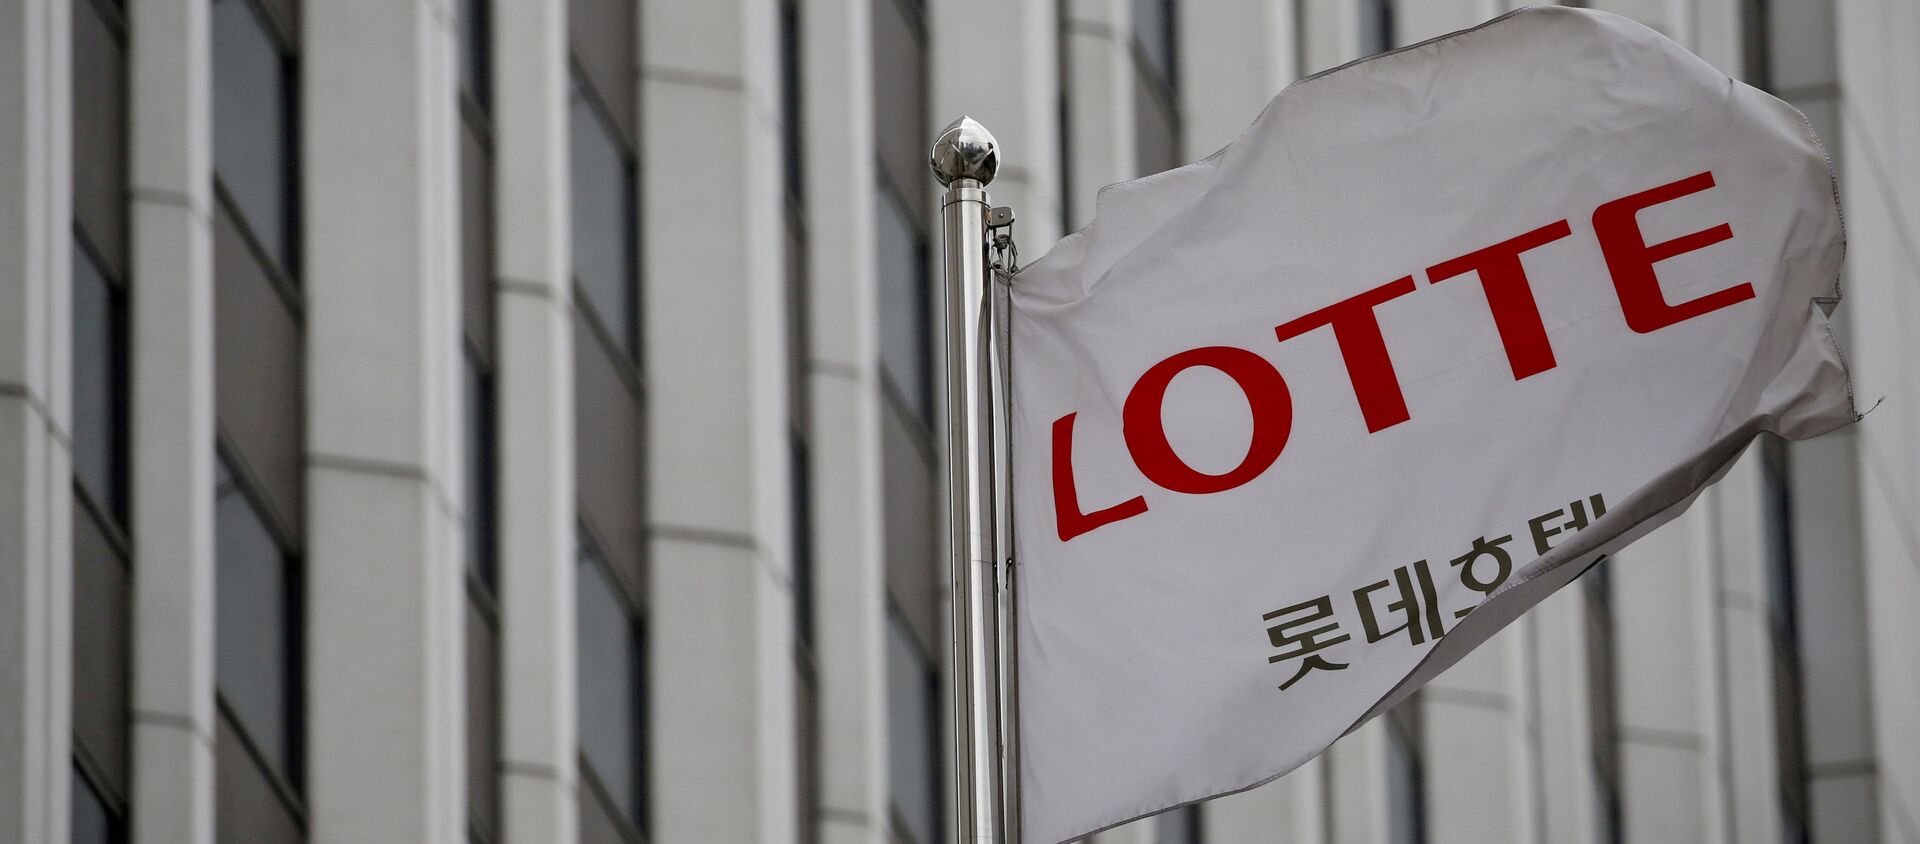 A flag bearing the logo of Lotte Hotel flutters at a Lotte Hotel - 俄罗斯卫星通讯社, 1920, 27.10.2020